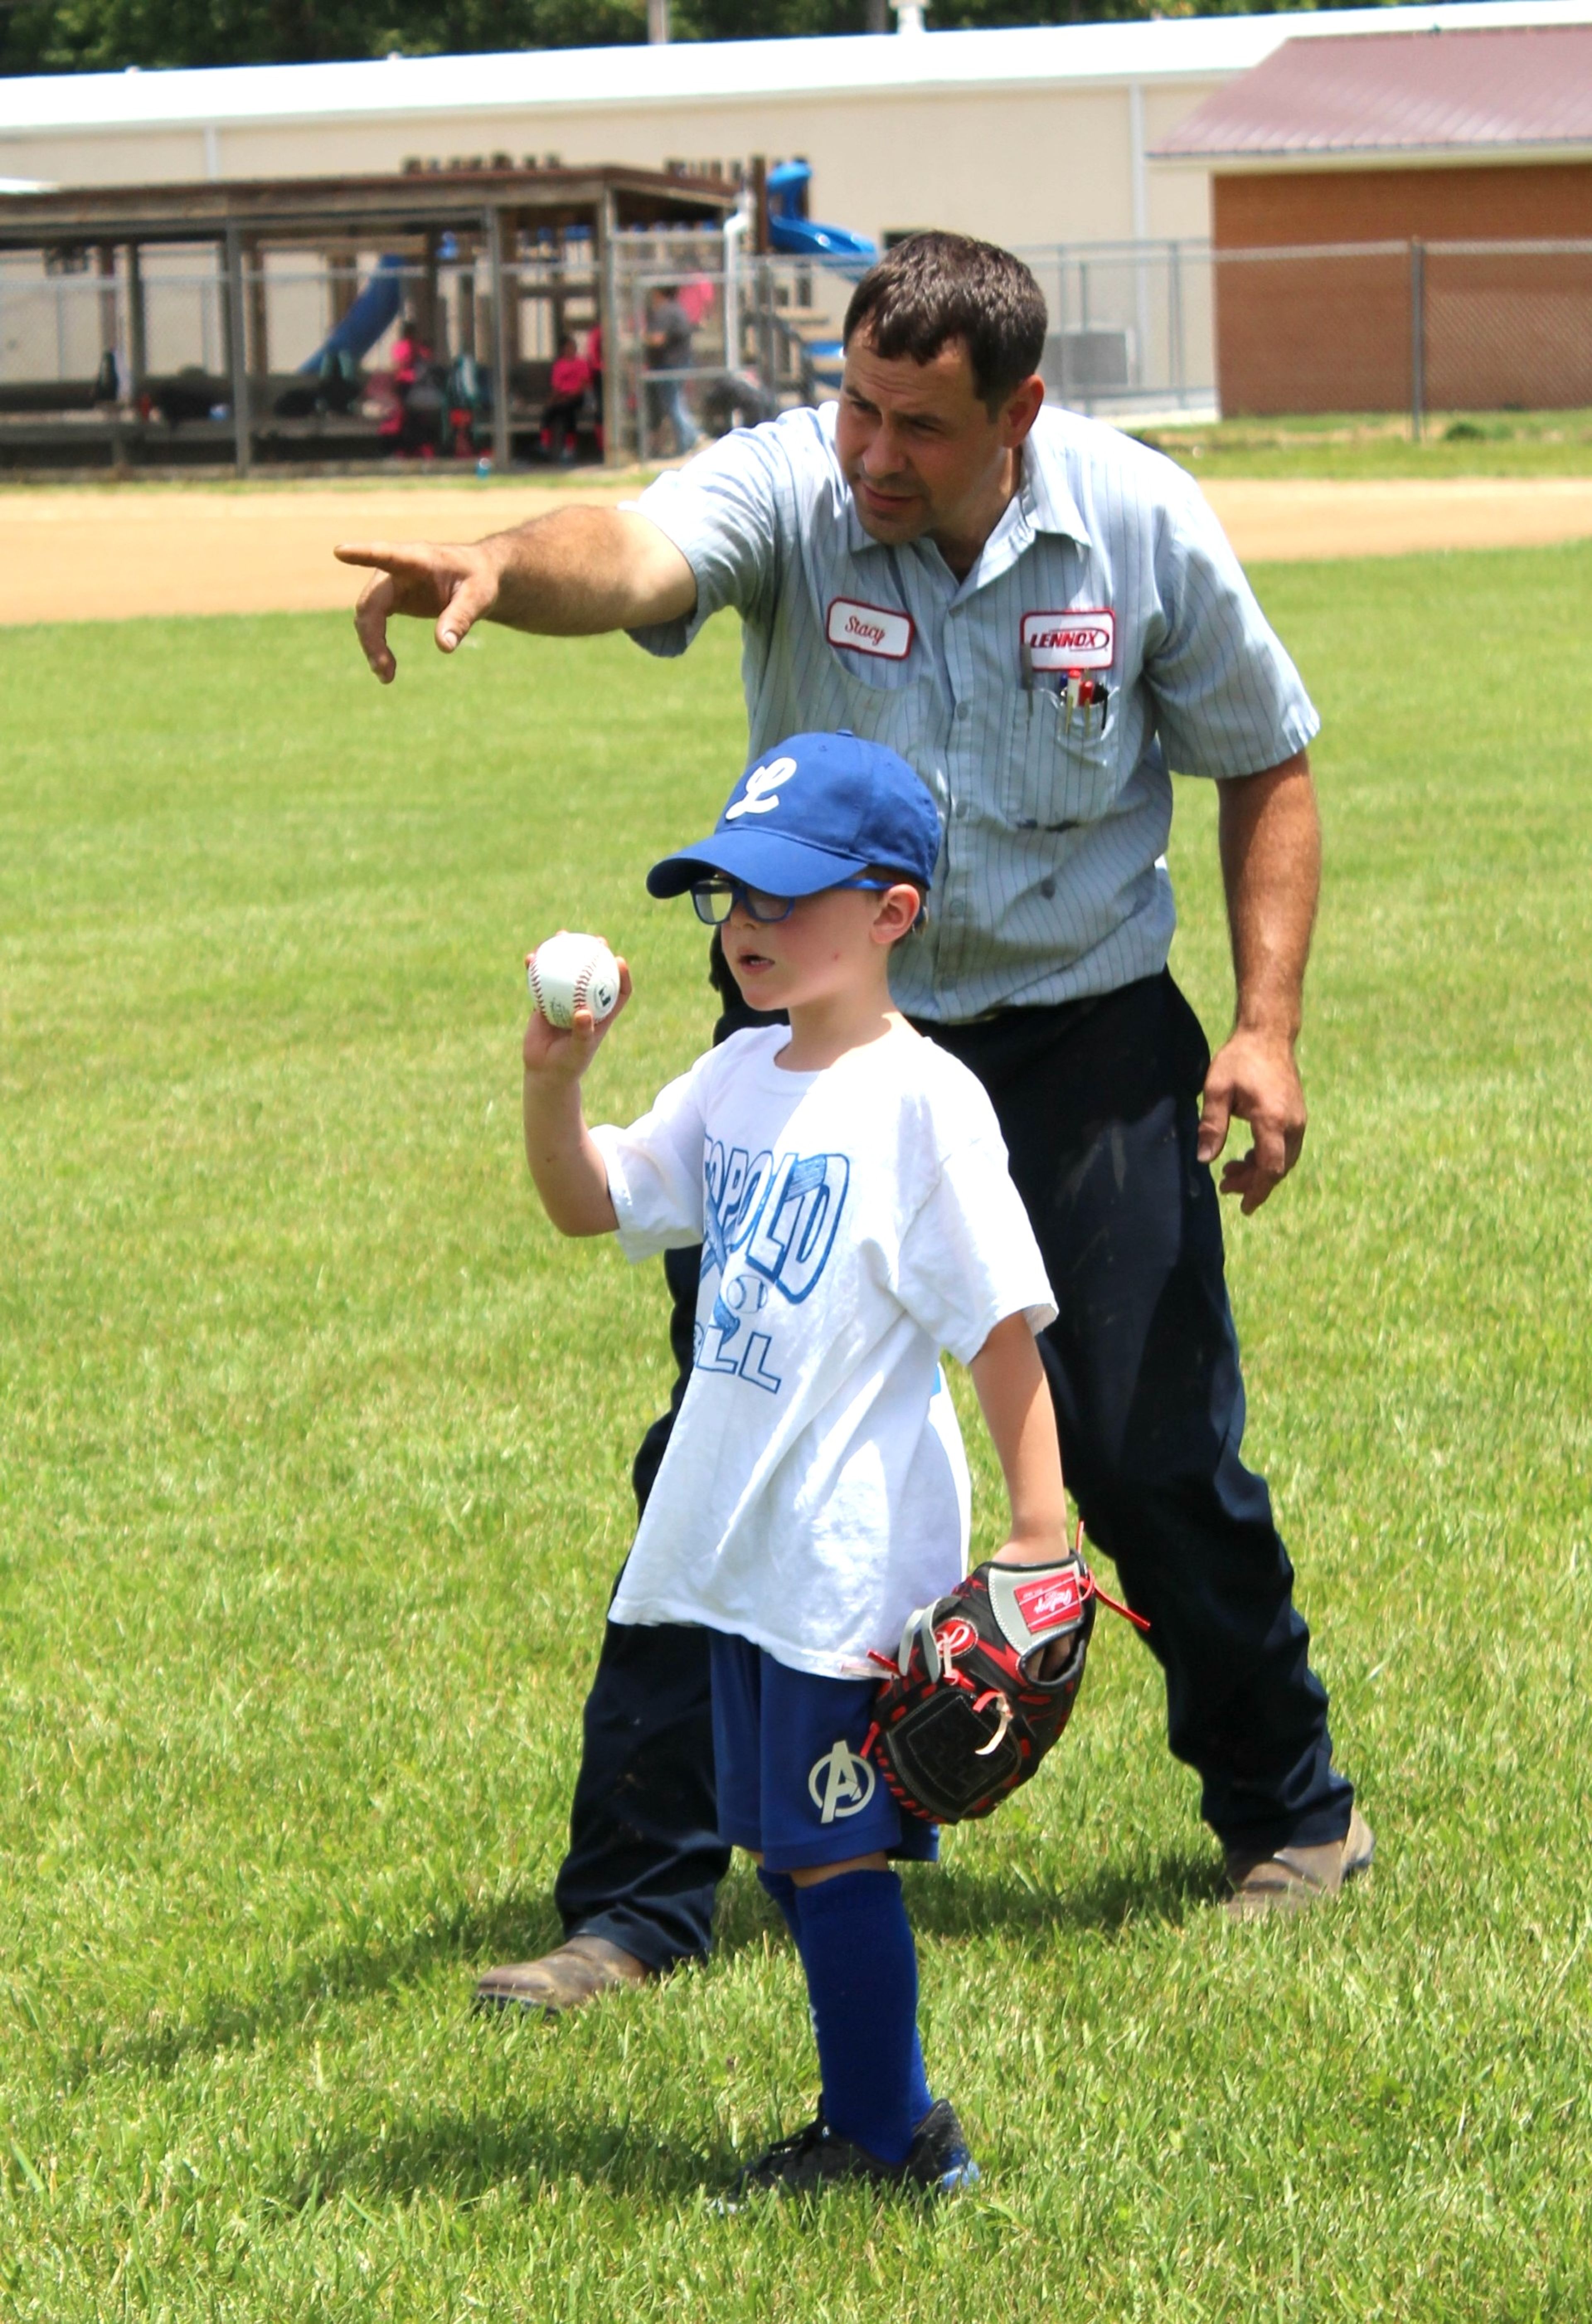 
Robert Deck throws a ball to the infield during the T-ball game.  Stacey Peters provides direction and helps him locate his target.